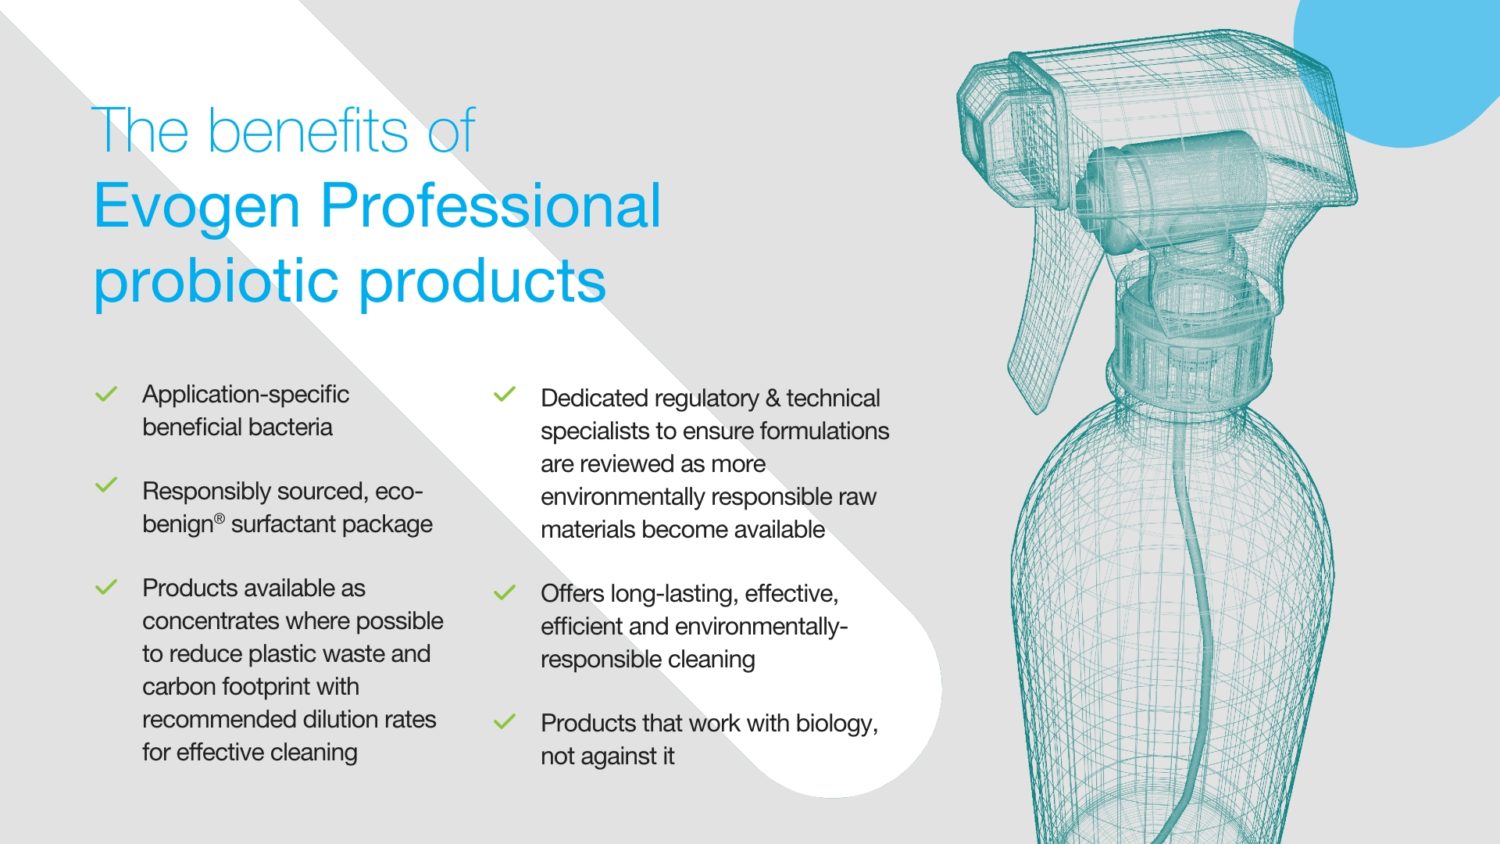 Not all probiotic cleaning products are created equal - scientific infographic from Genesis Biosciences